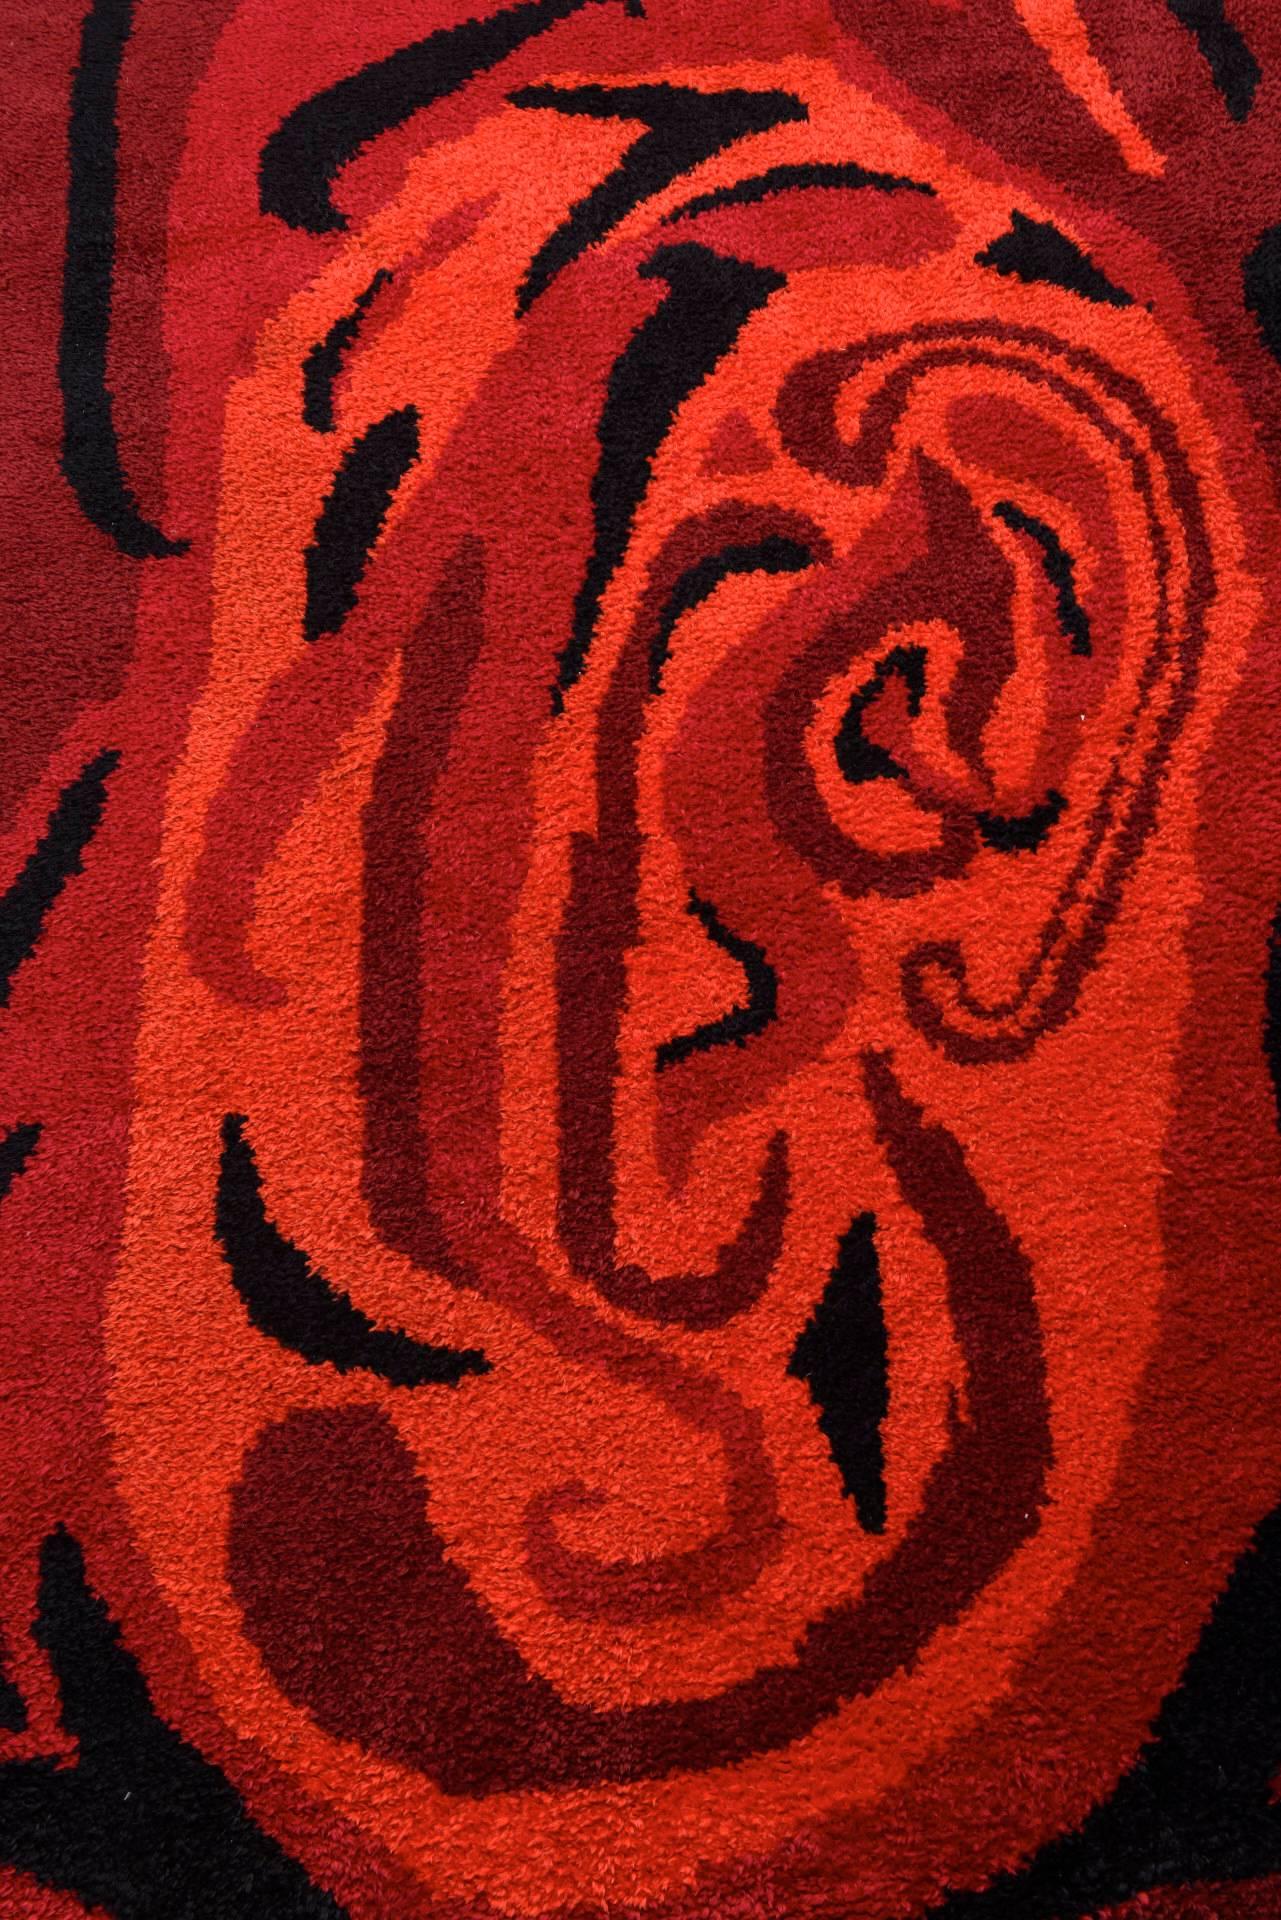 An unusual Scandinavian knotted carpet, characterized by a swirling pattern to appear in the middle an abstract designed mother and child figures in three tones of red, orange and black.
Patterns such as this one were clearly influenced by Op-Art